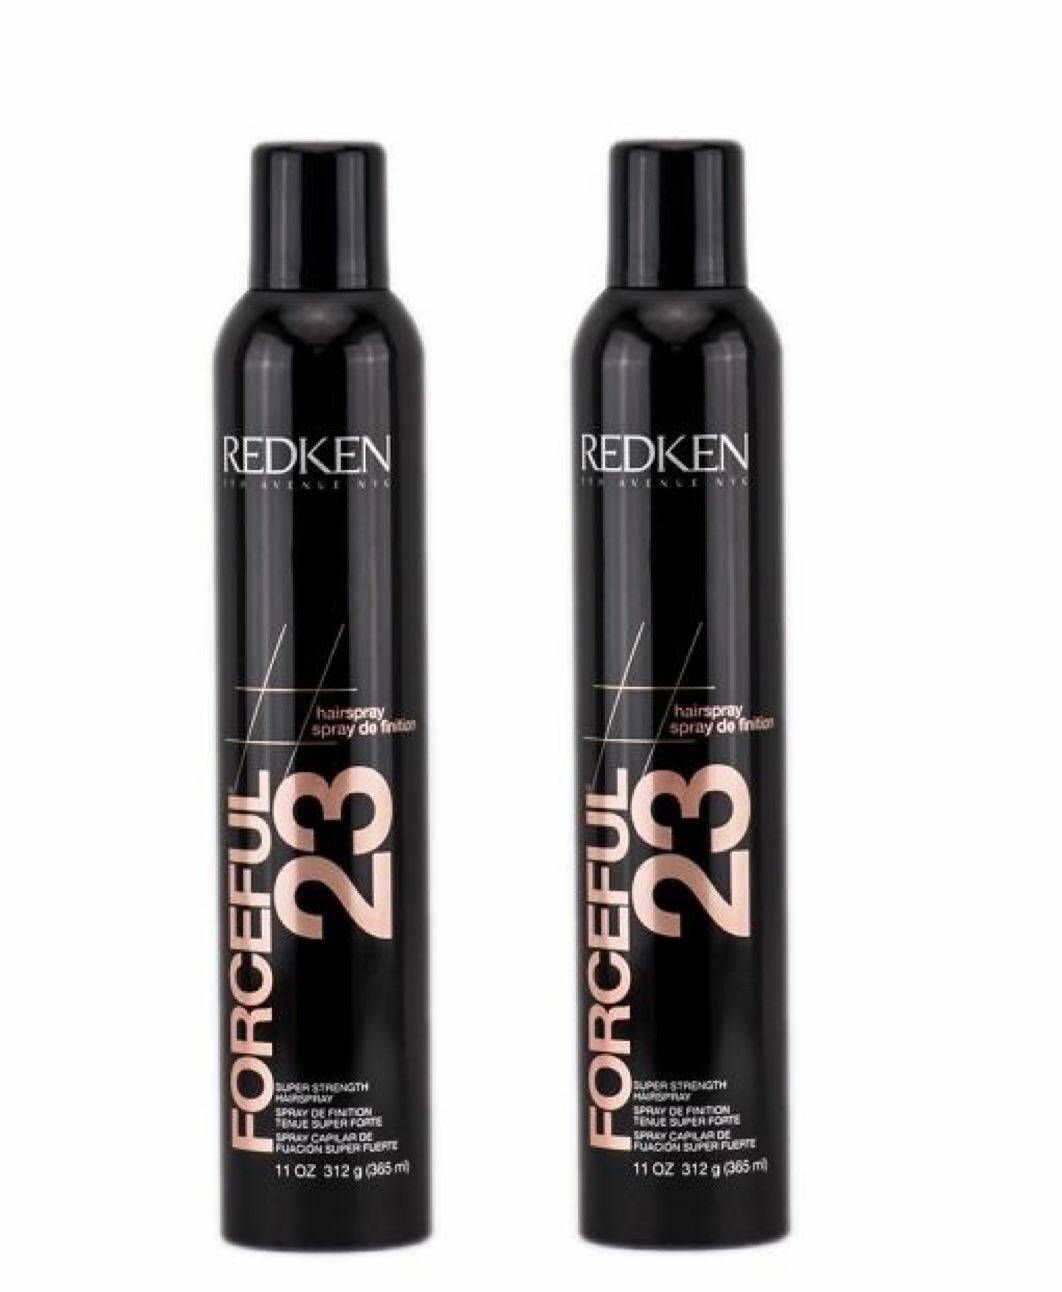 Redken Styling Hairspray Forceful 23 365ml x 2 Duo Pack - On Line Hair Depot